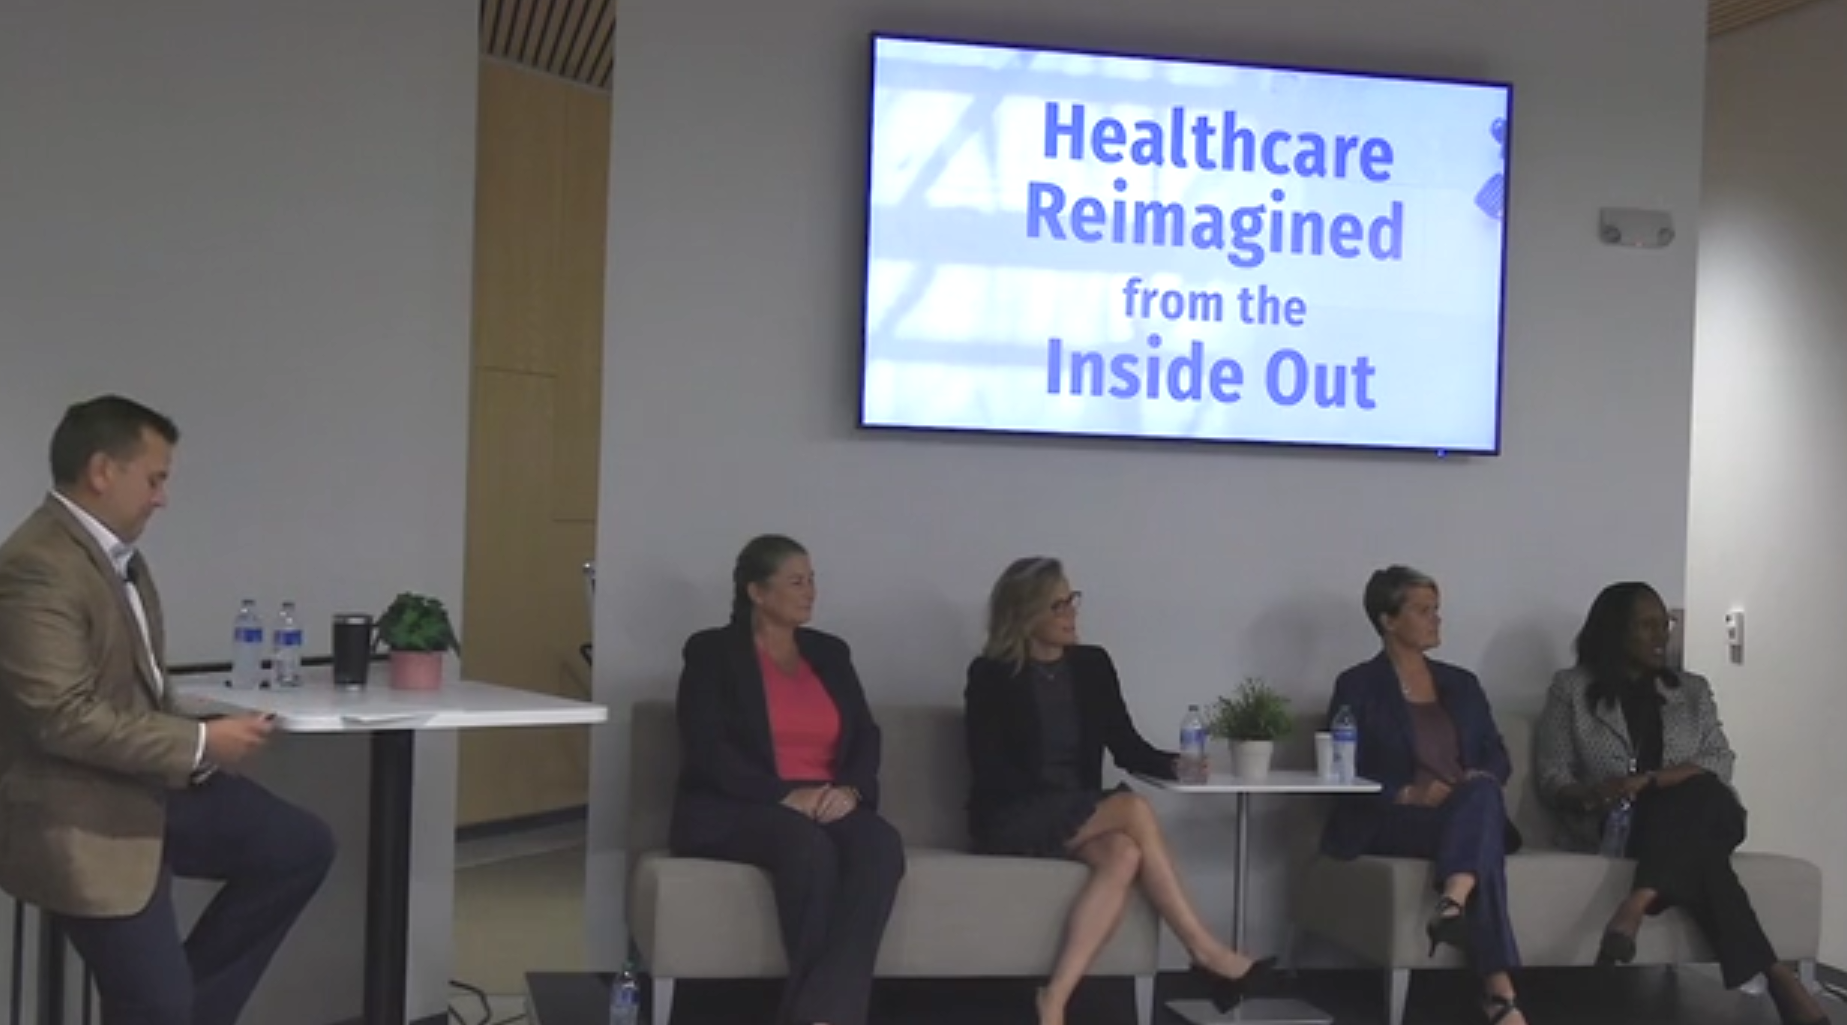 Healthcare Reimagined from the Inside Out